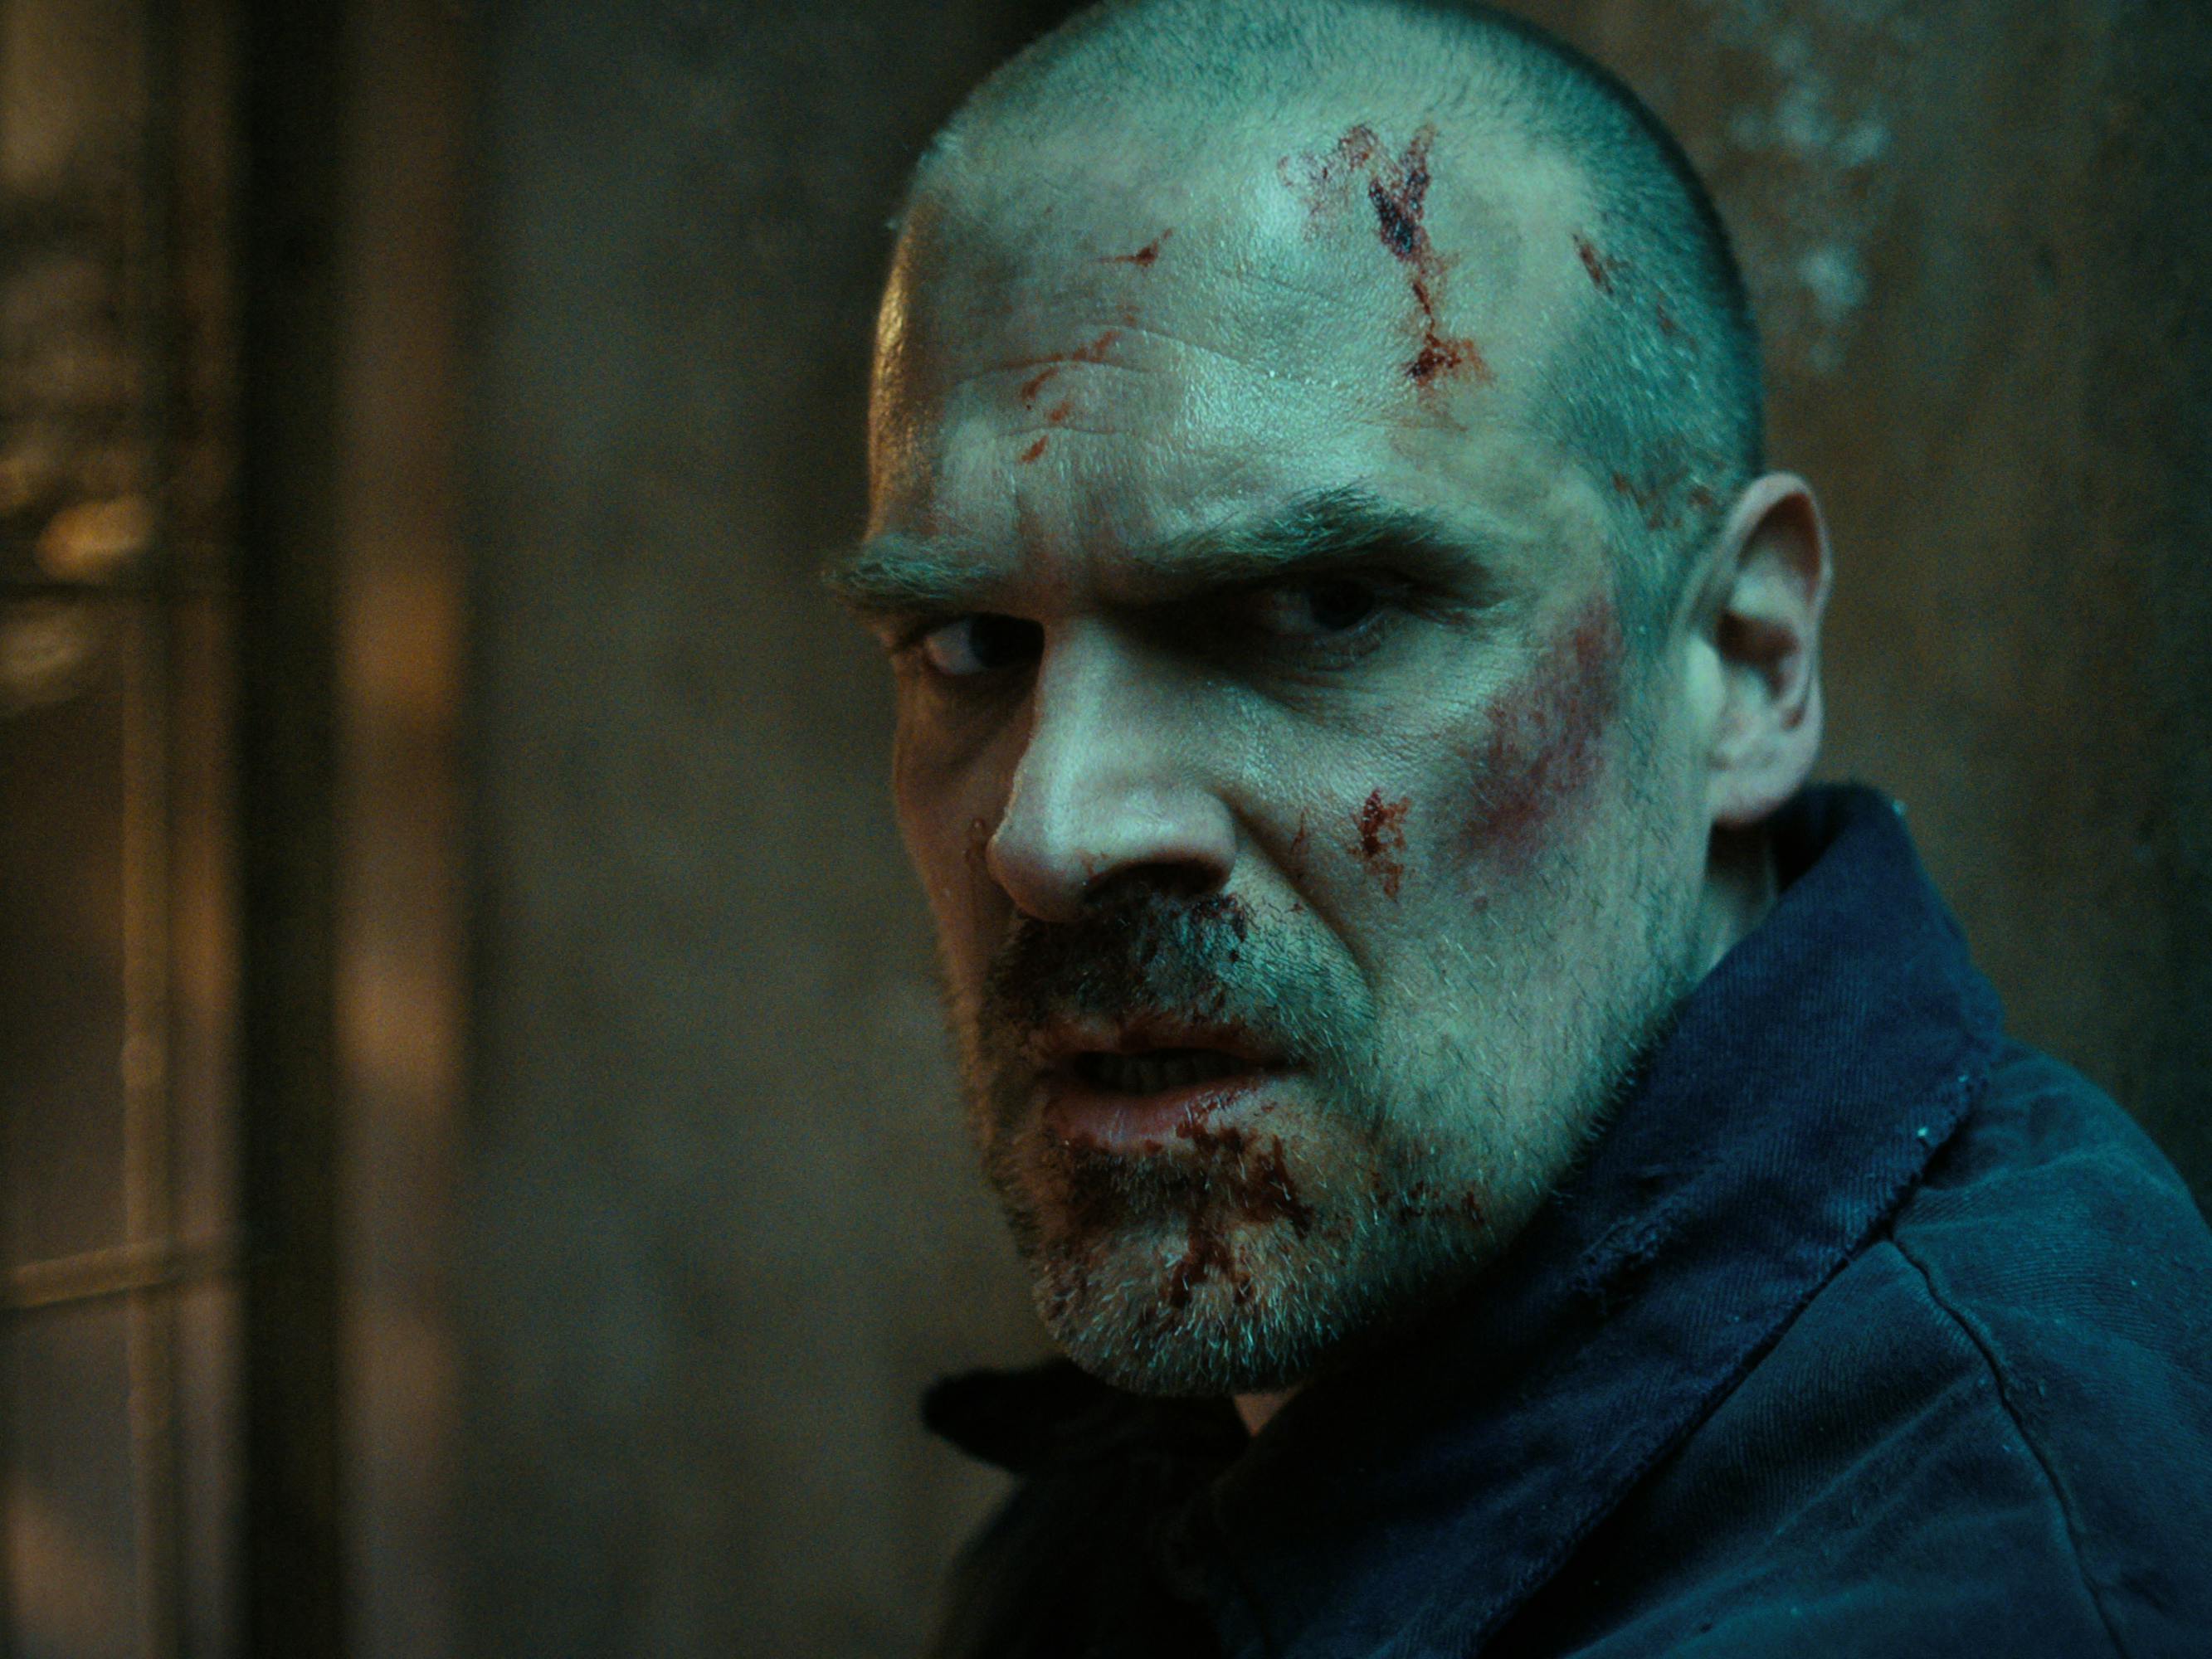 Jim Hopper (David Harbour) is bald and looks terrifying in this close-up shot.